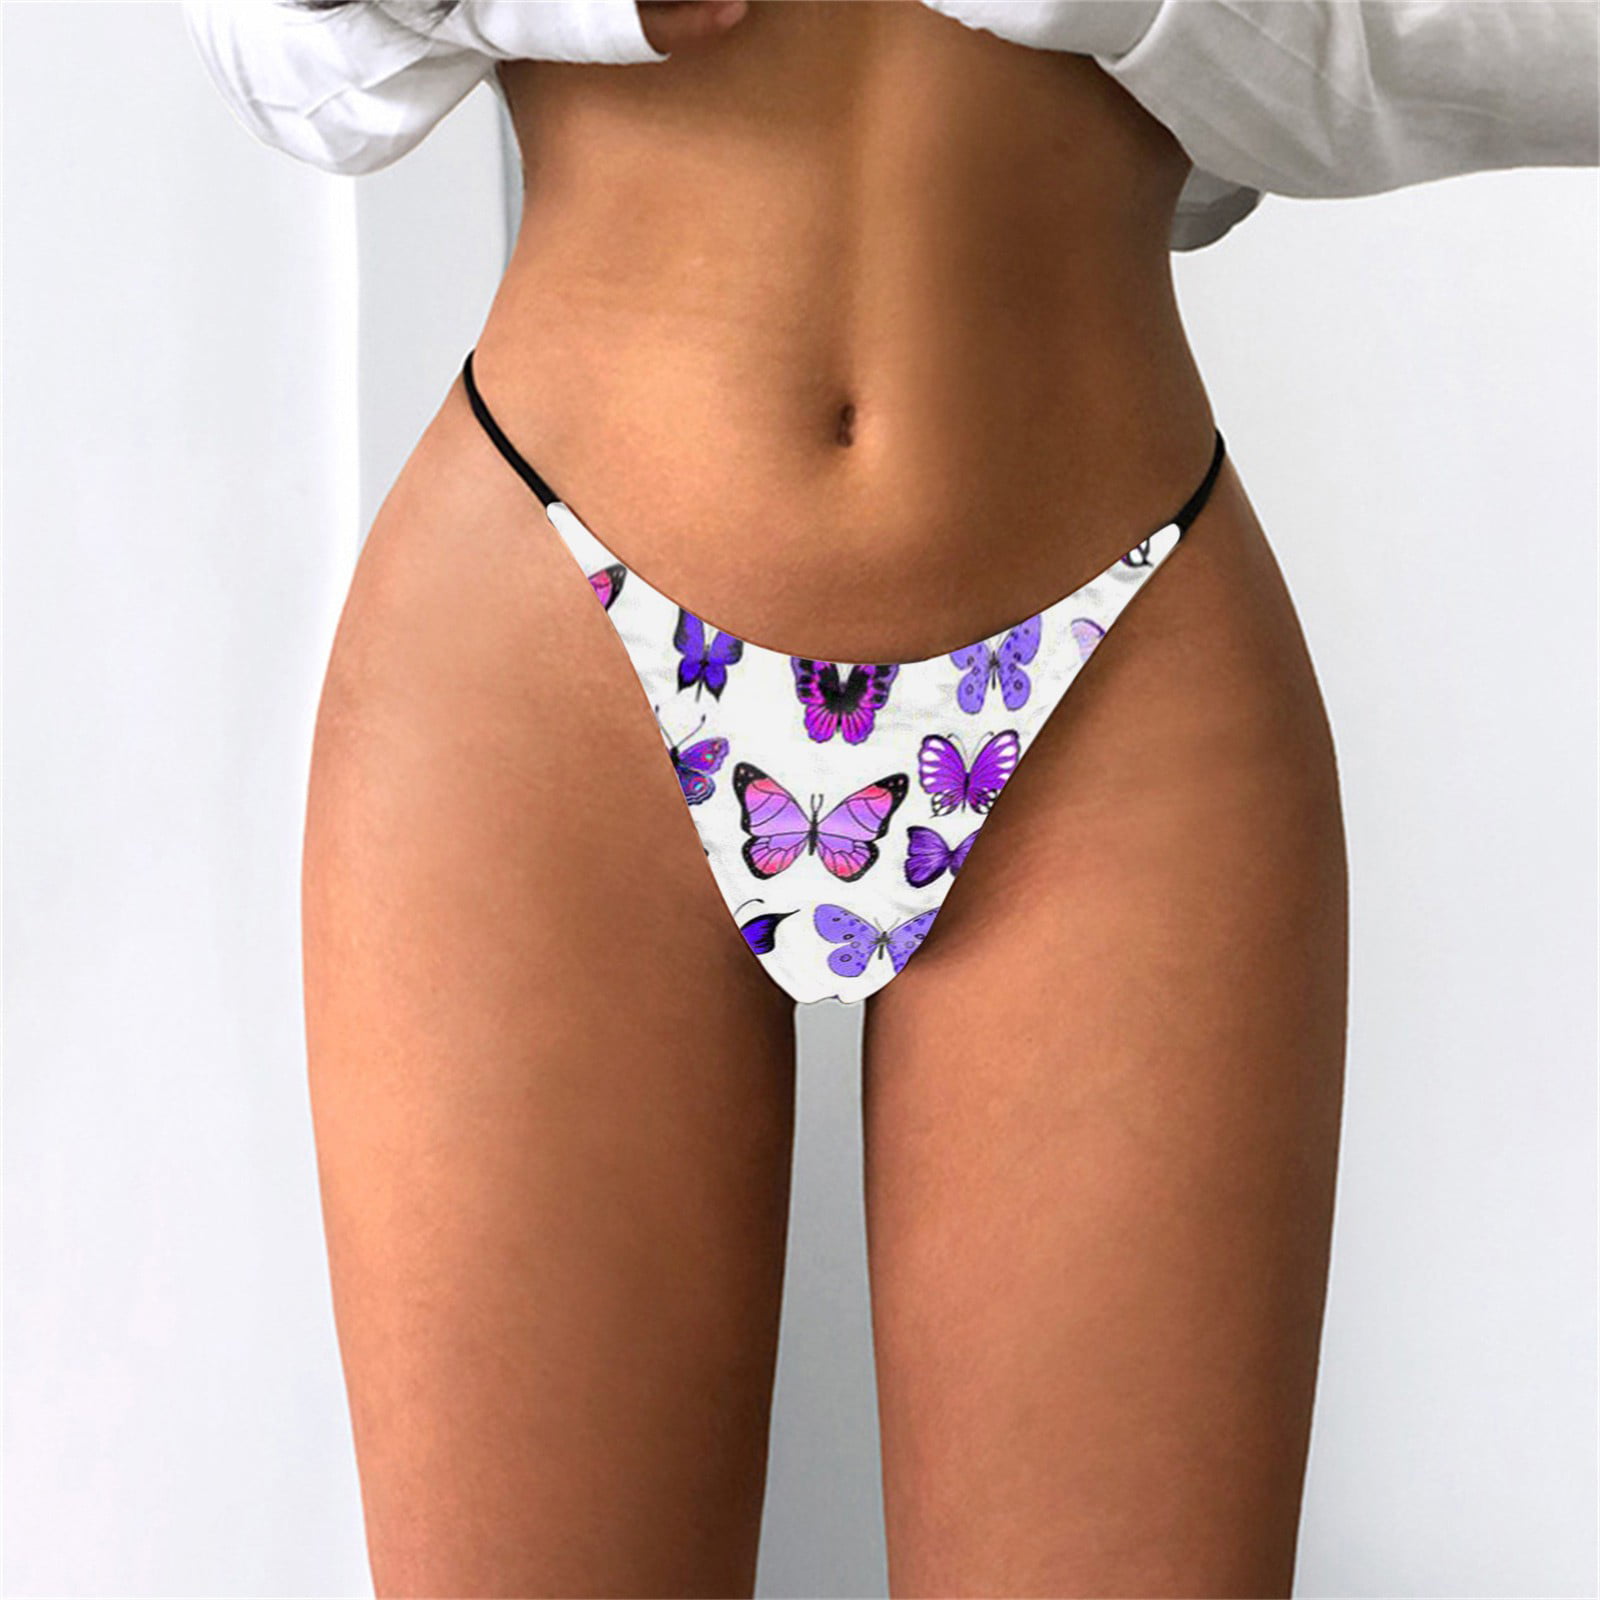 Horse Black and White Animal Brief Women G-String Underwear T-Back Breathable Cool Soft Panty 